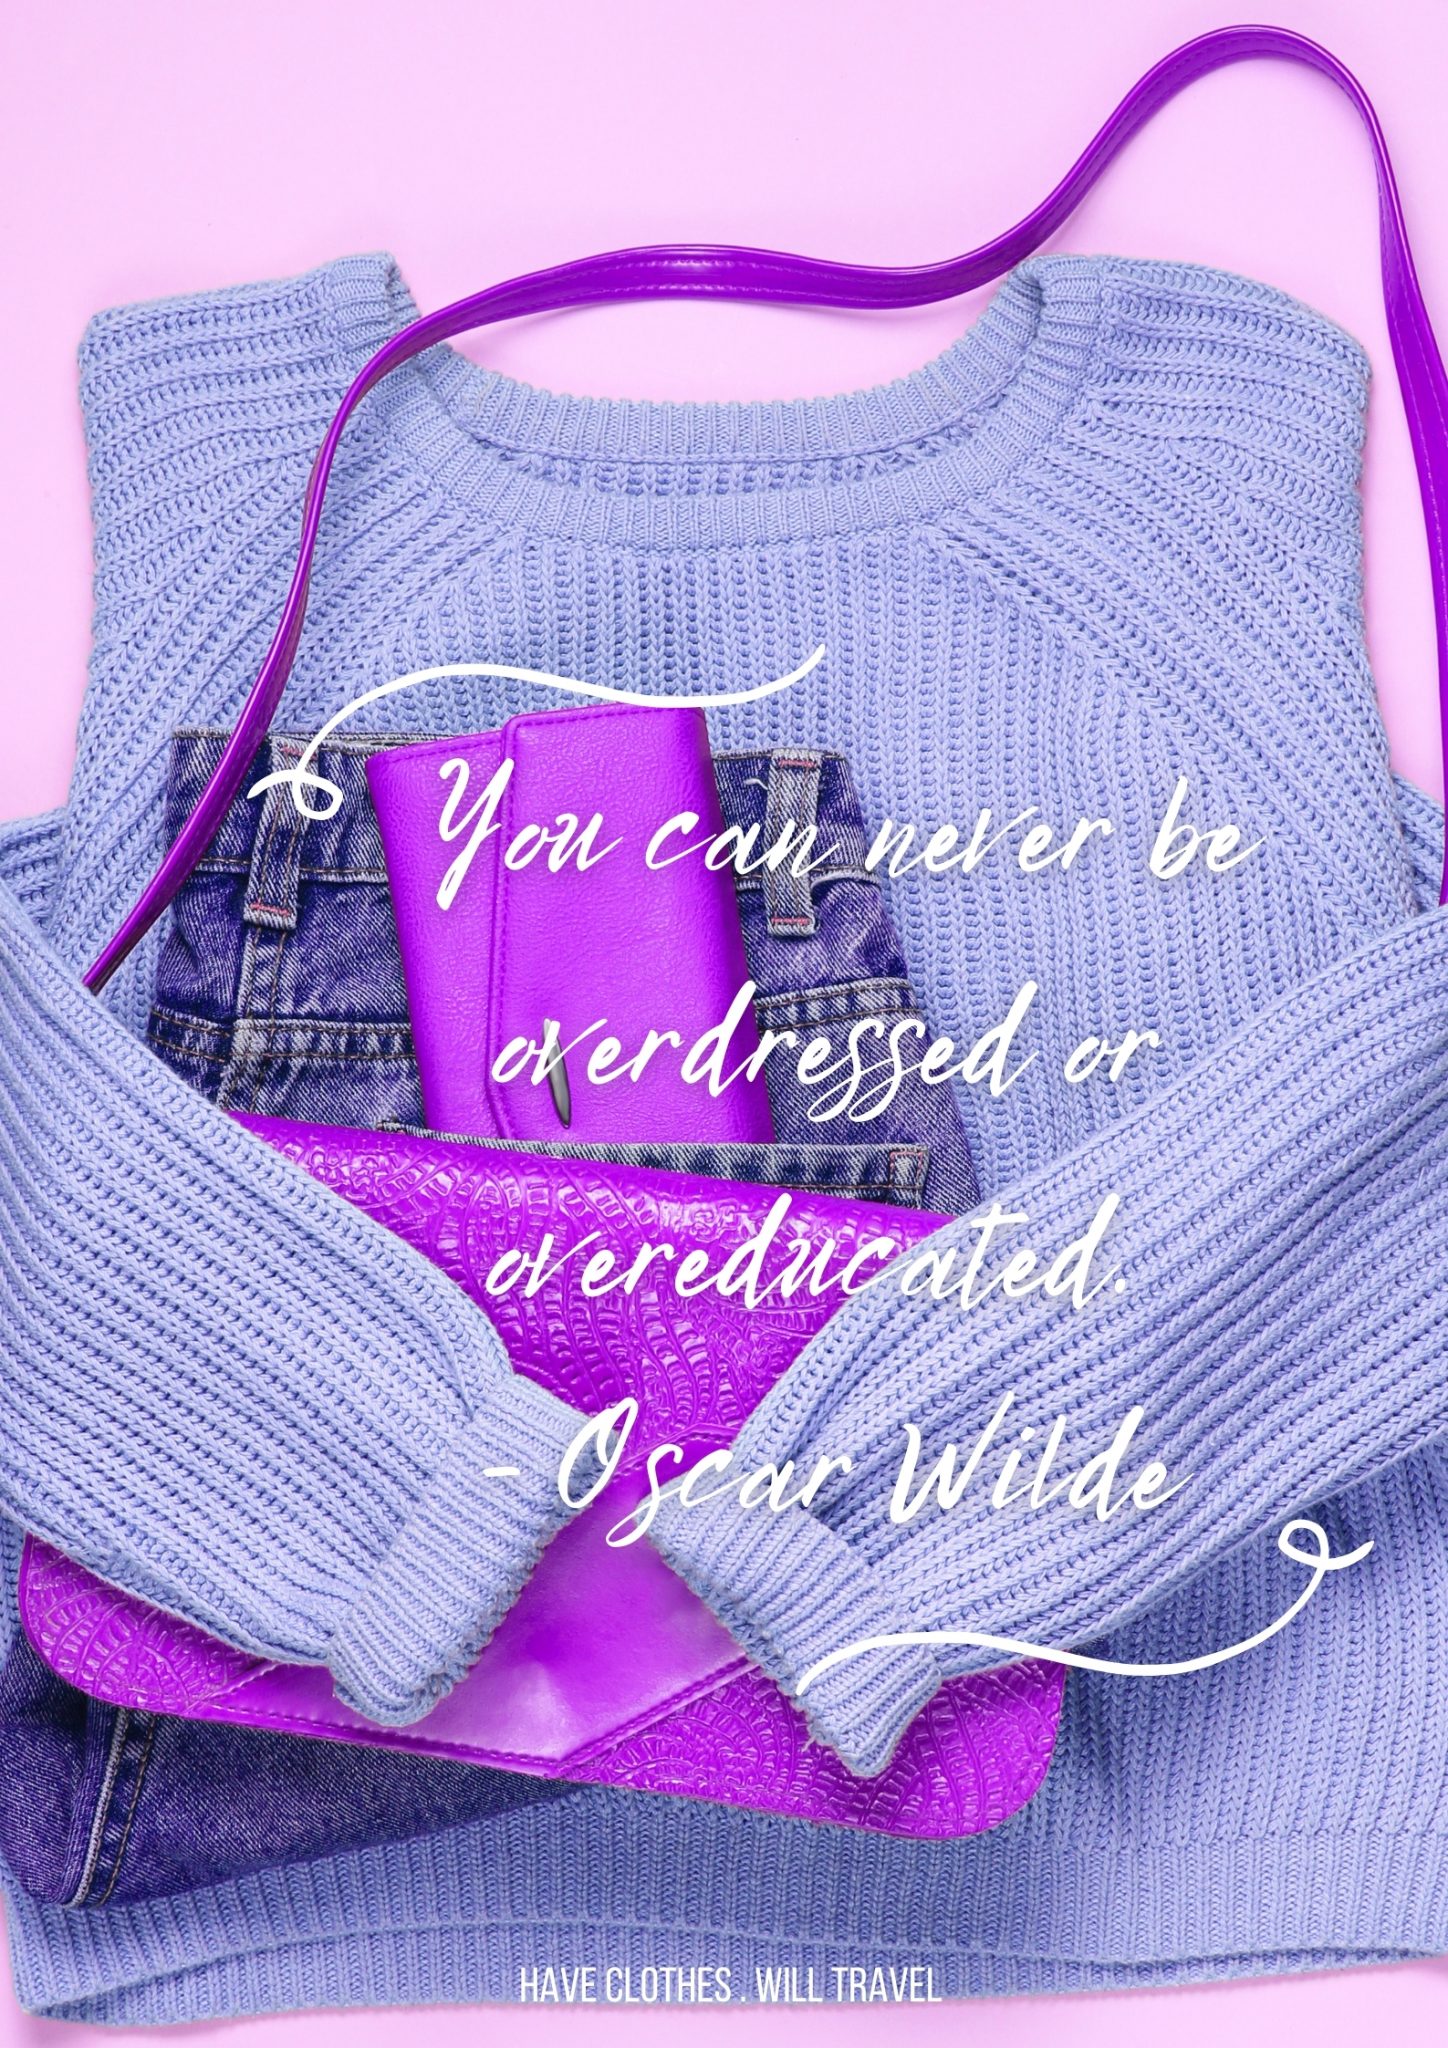 A lilac purple sweater is folded around a pair of jeans and a purple handbag. Text across the center of the image says, "You can never be over dressed or overeducated. - Oscar Wilde"